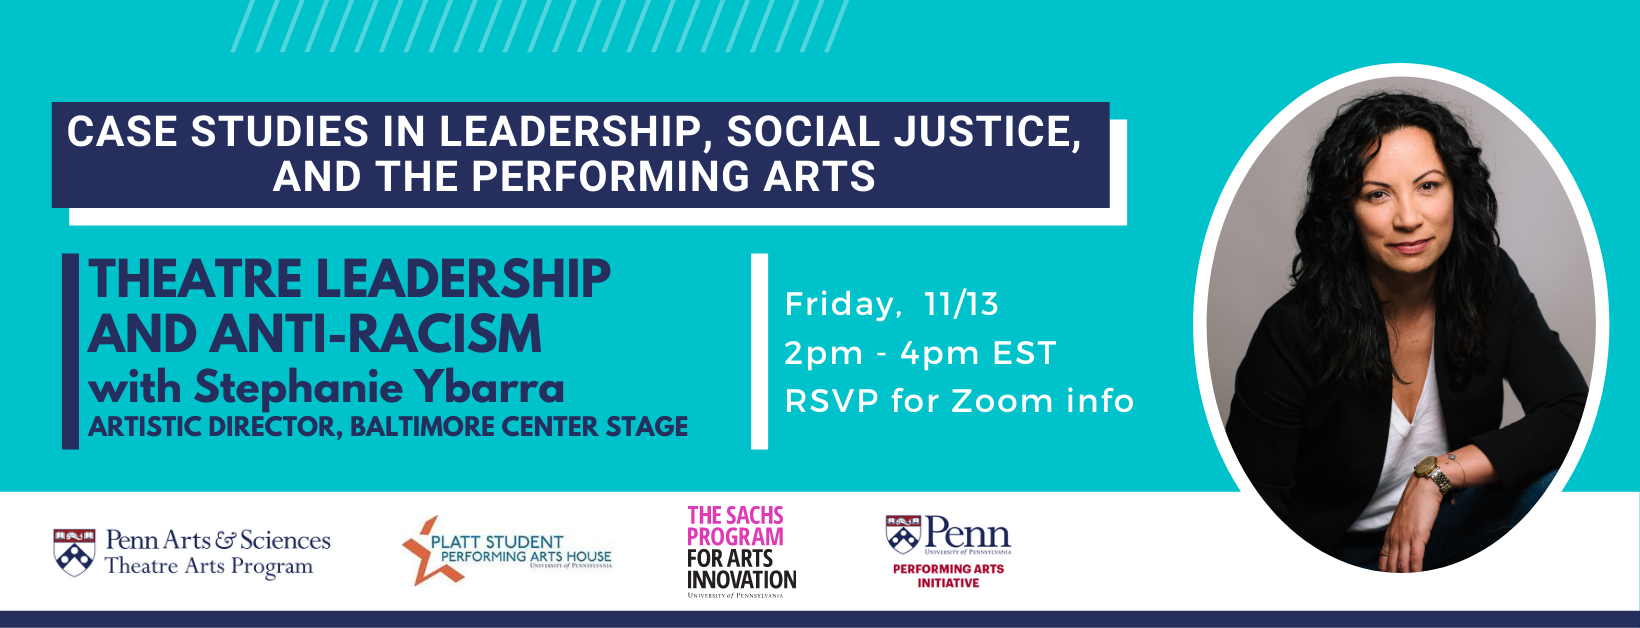 Banner: Case Studies in Leadership, Social Justice and the Performing Arts -- Theatre Leadership and Anti-Racism with Stephanie Ybarra, Artistic Director, Baltimore Center Stage, Friday, November 13th, 2pm to 4pm EST, RSVP to receive Zoom link, presented by the Penn Theatre Arts Program, Sach Program for Arts Innovation, Penn Performing Arts Initiative, and Platt Student Performing Arts House